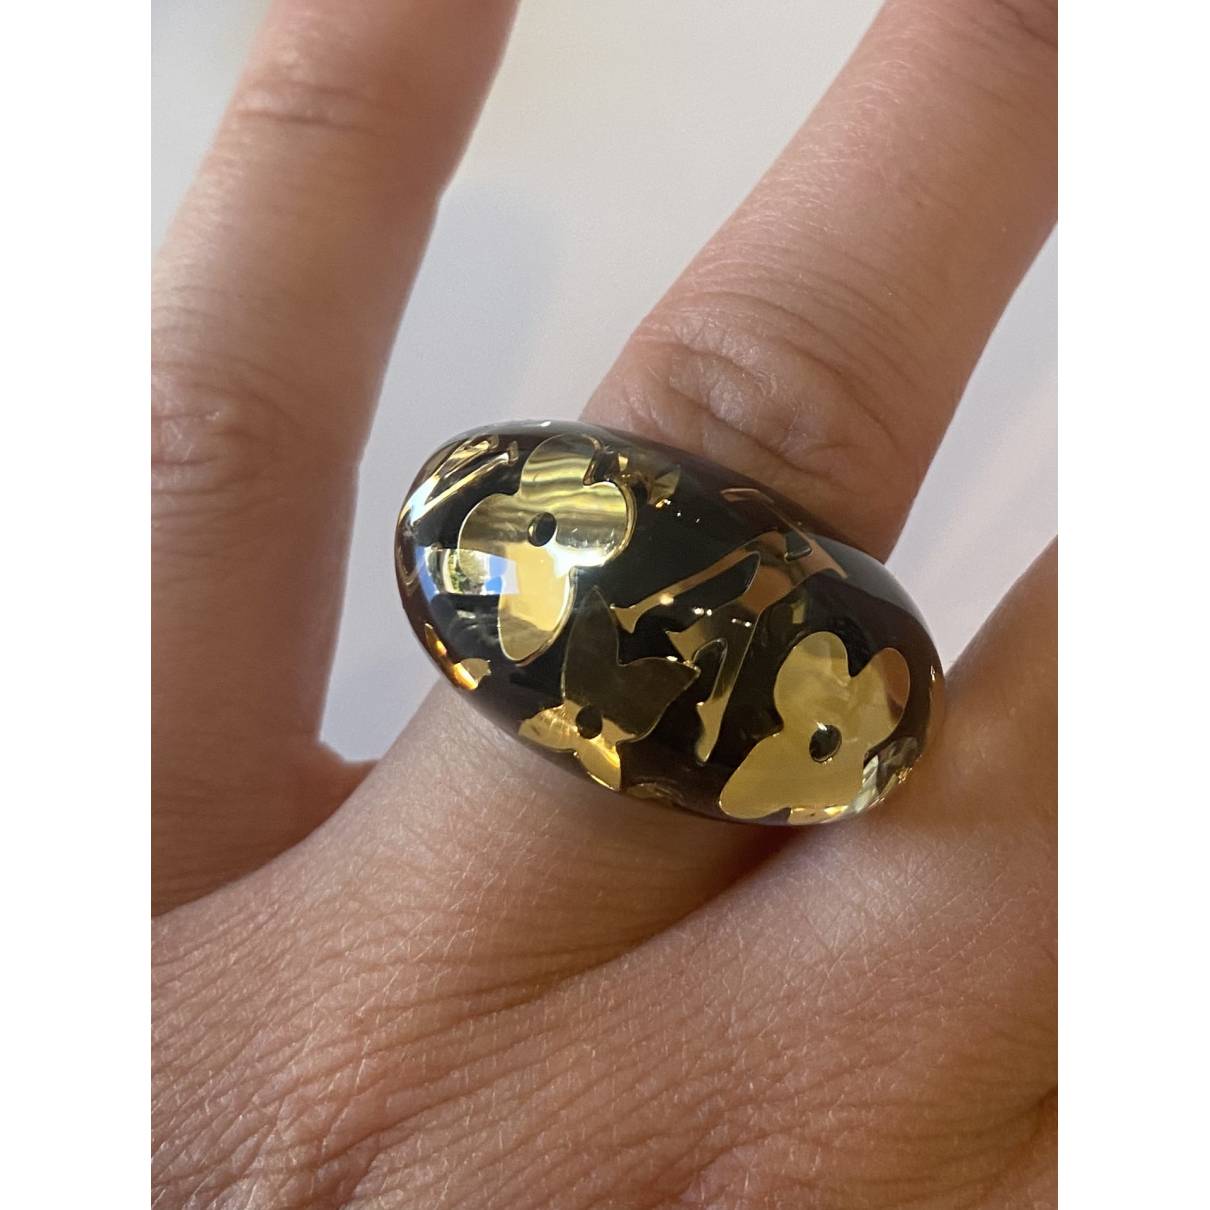 Louis Vuitton - Authenticated Inclusion Ring - Plastic Black for Women, Very Good Condition